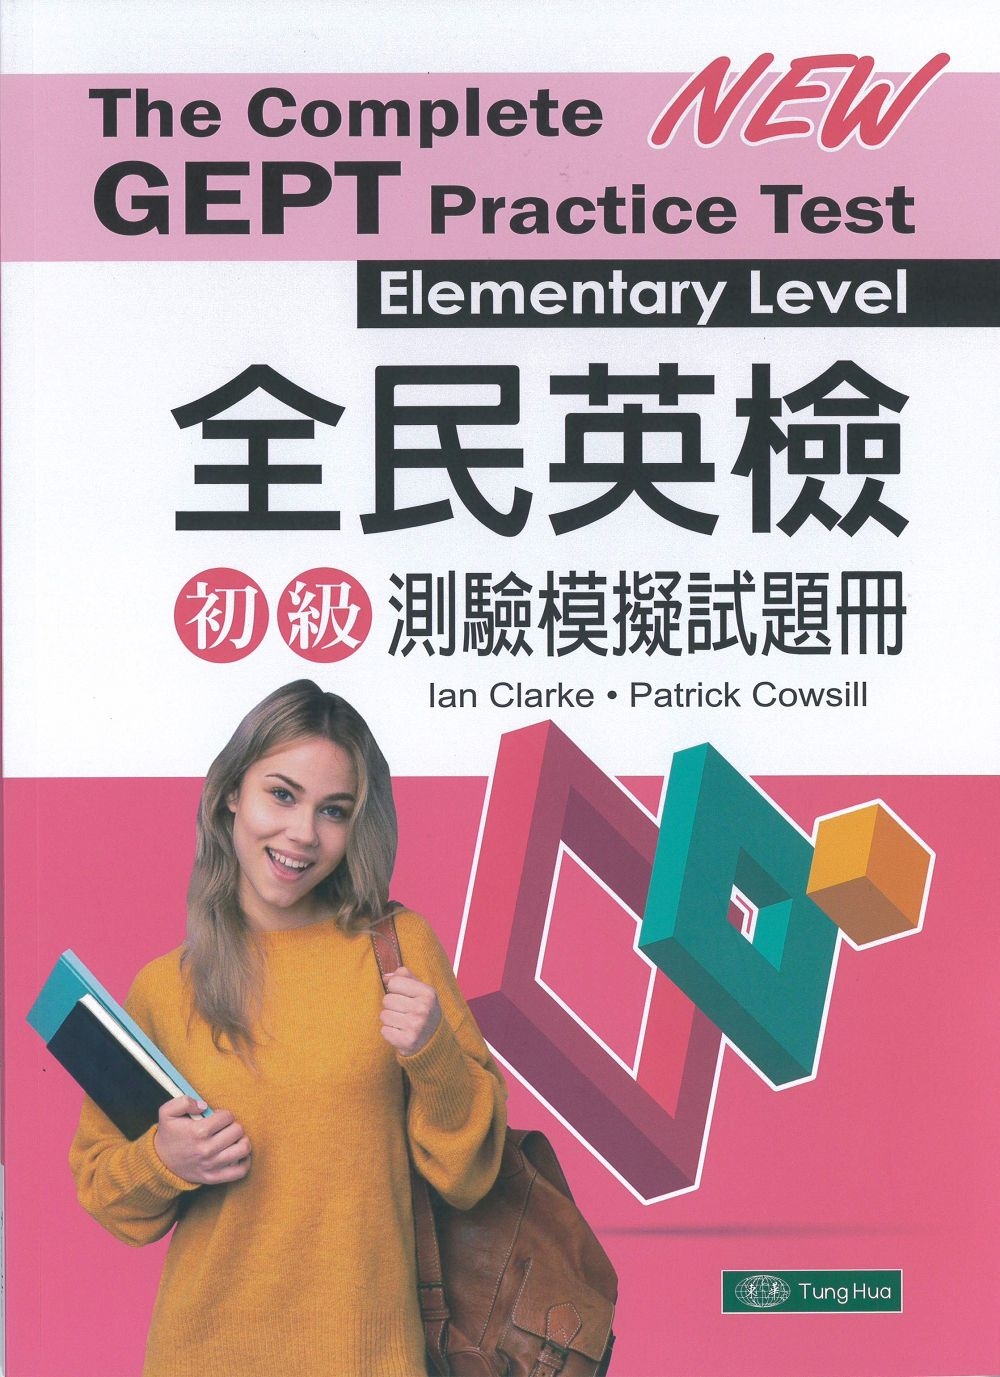 The Complete GEPT Practice Tes...